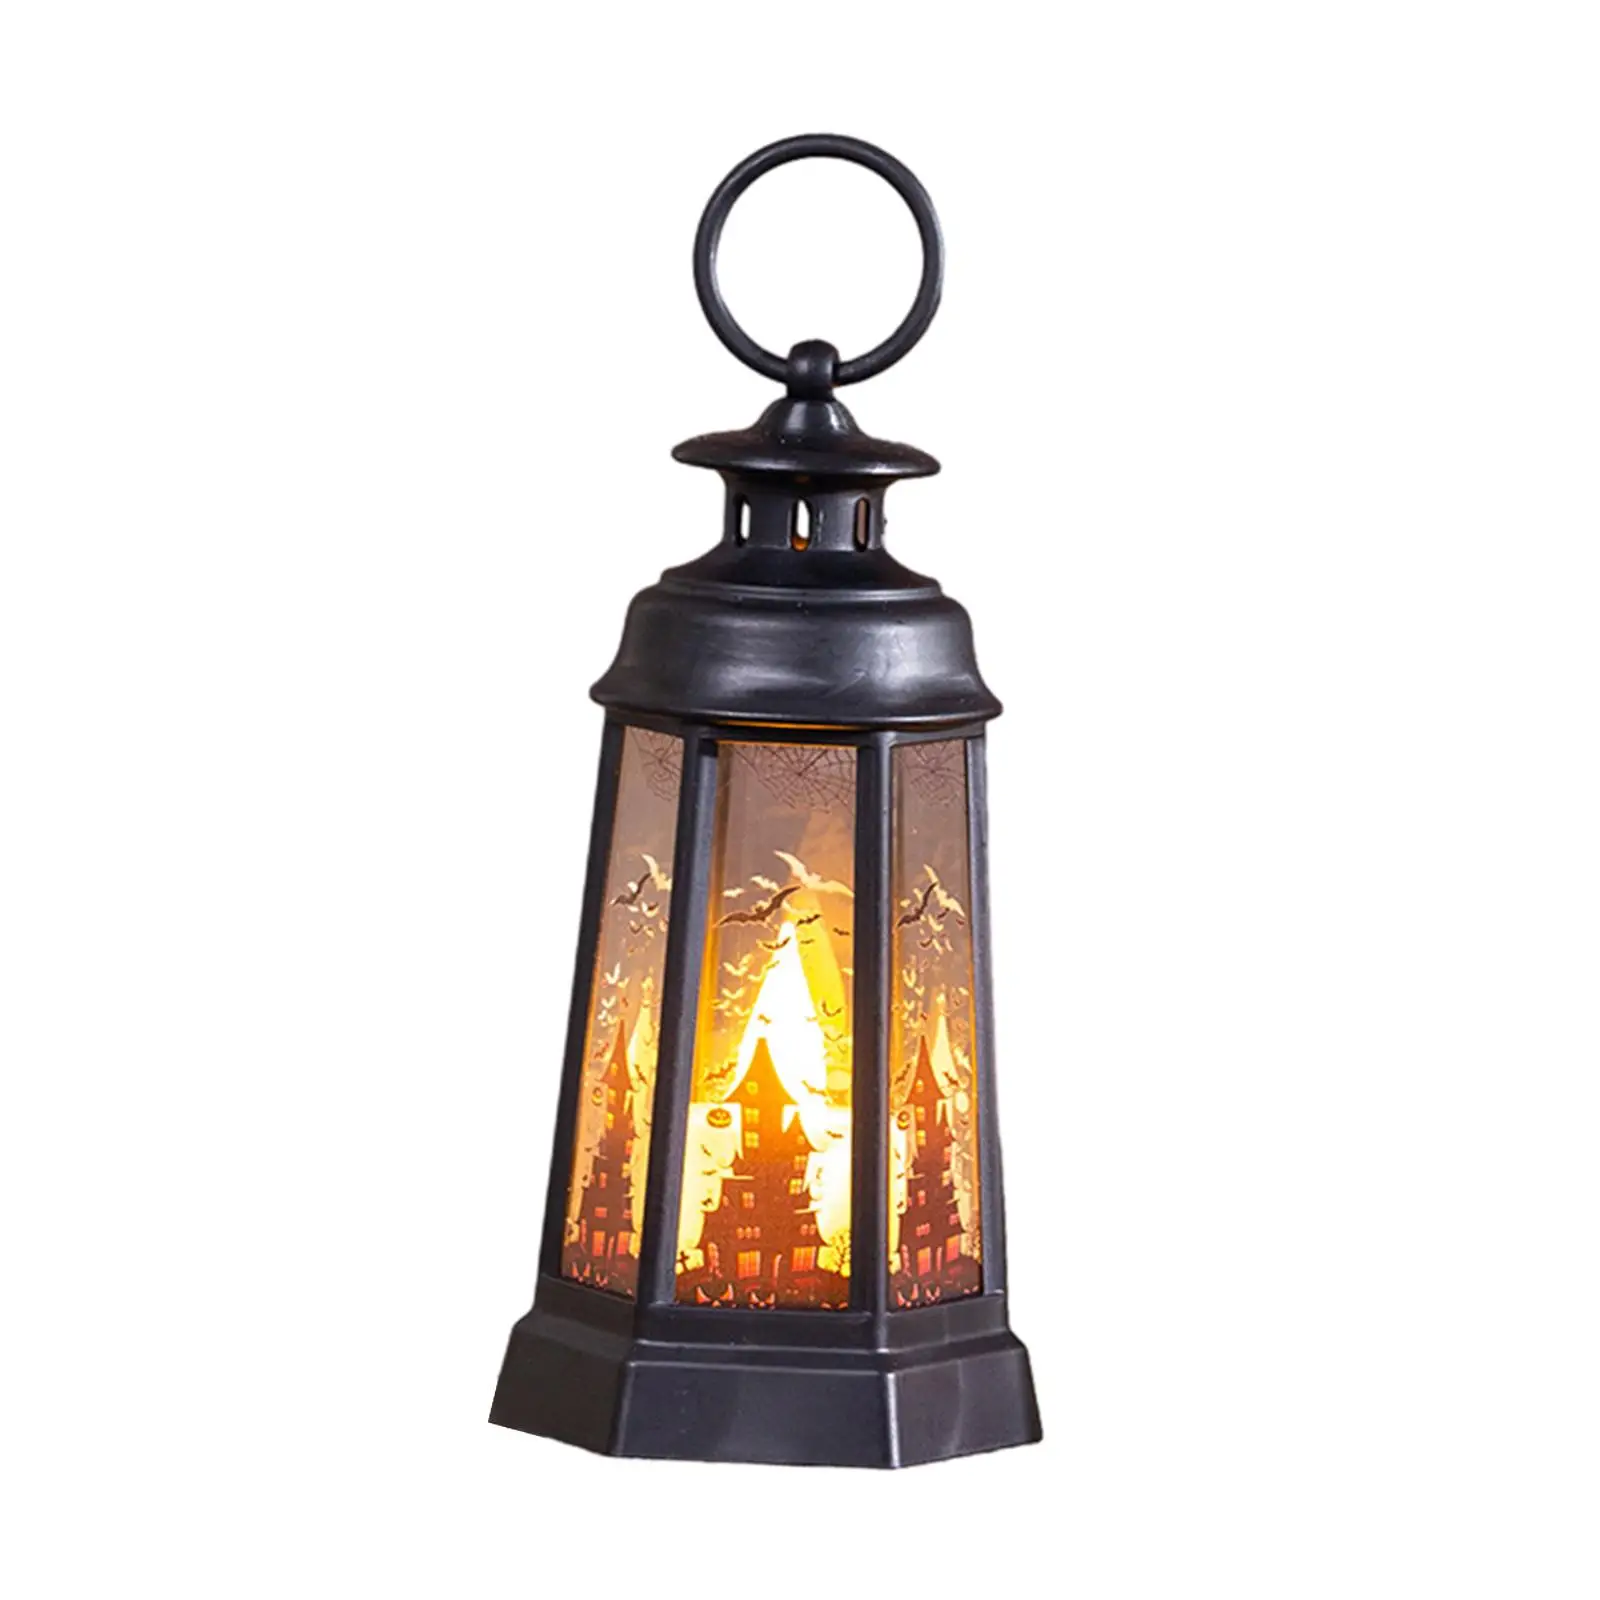 Halloween Lighted Lantern Props Ornament Decorative Candle Holder for Fireplace Birthday Festival Adults Kids ValentineS Day